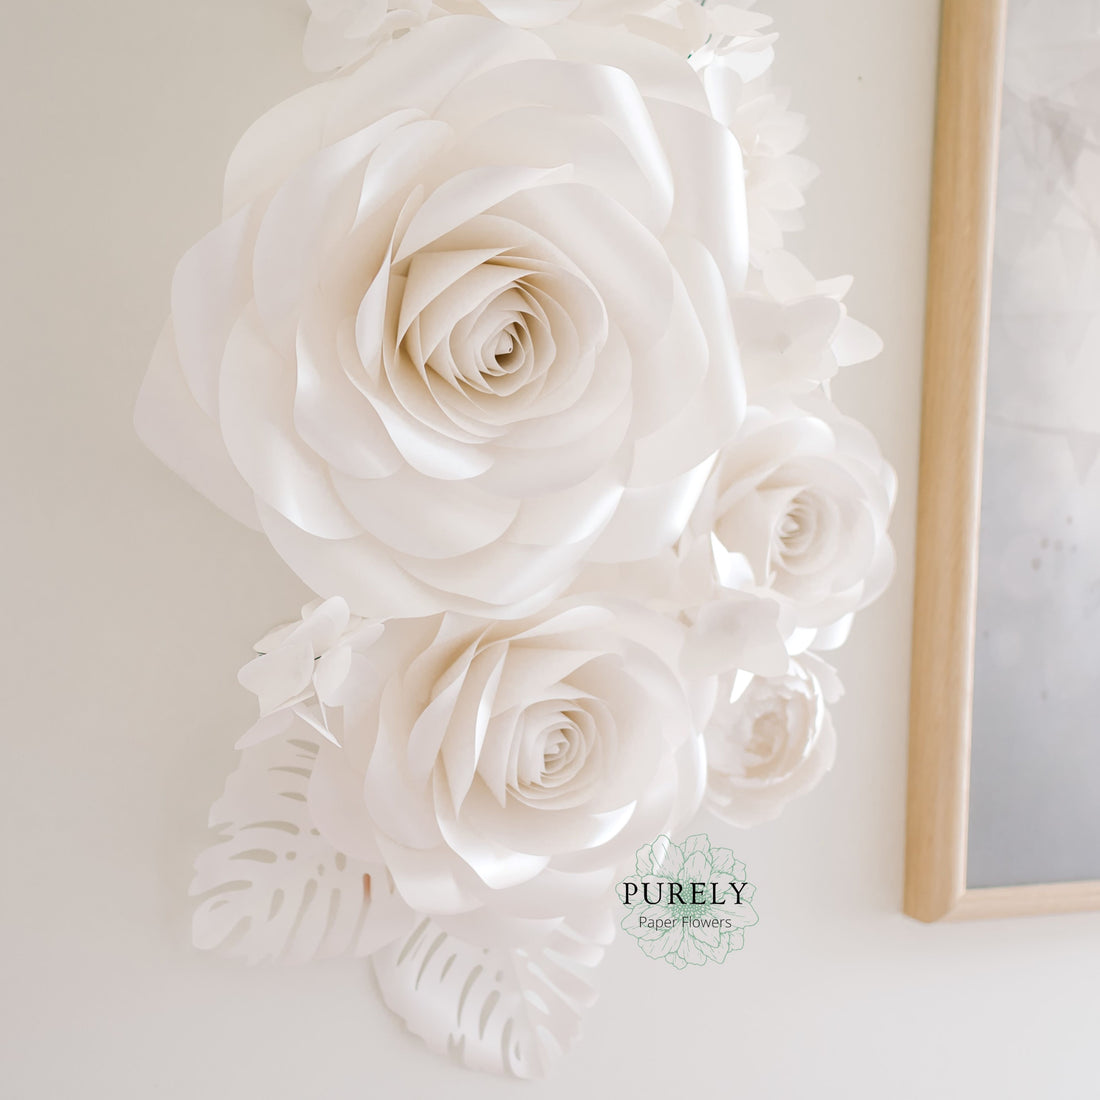 Paper Flowers Wall Decor Nursery Large Paper Flowers Paper Flowers  Decoration Nursery Paper Flowers Set -  Norway